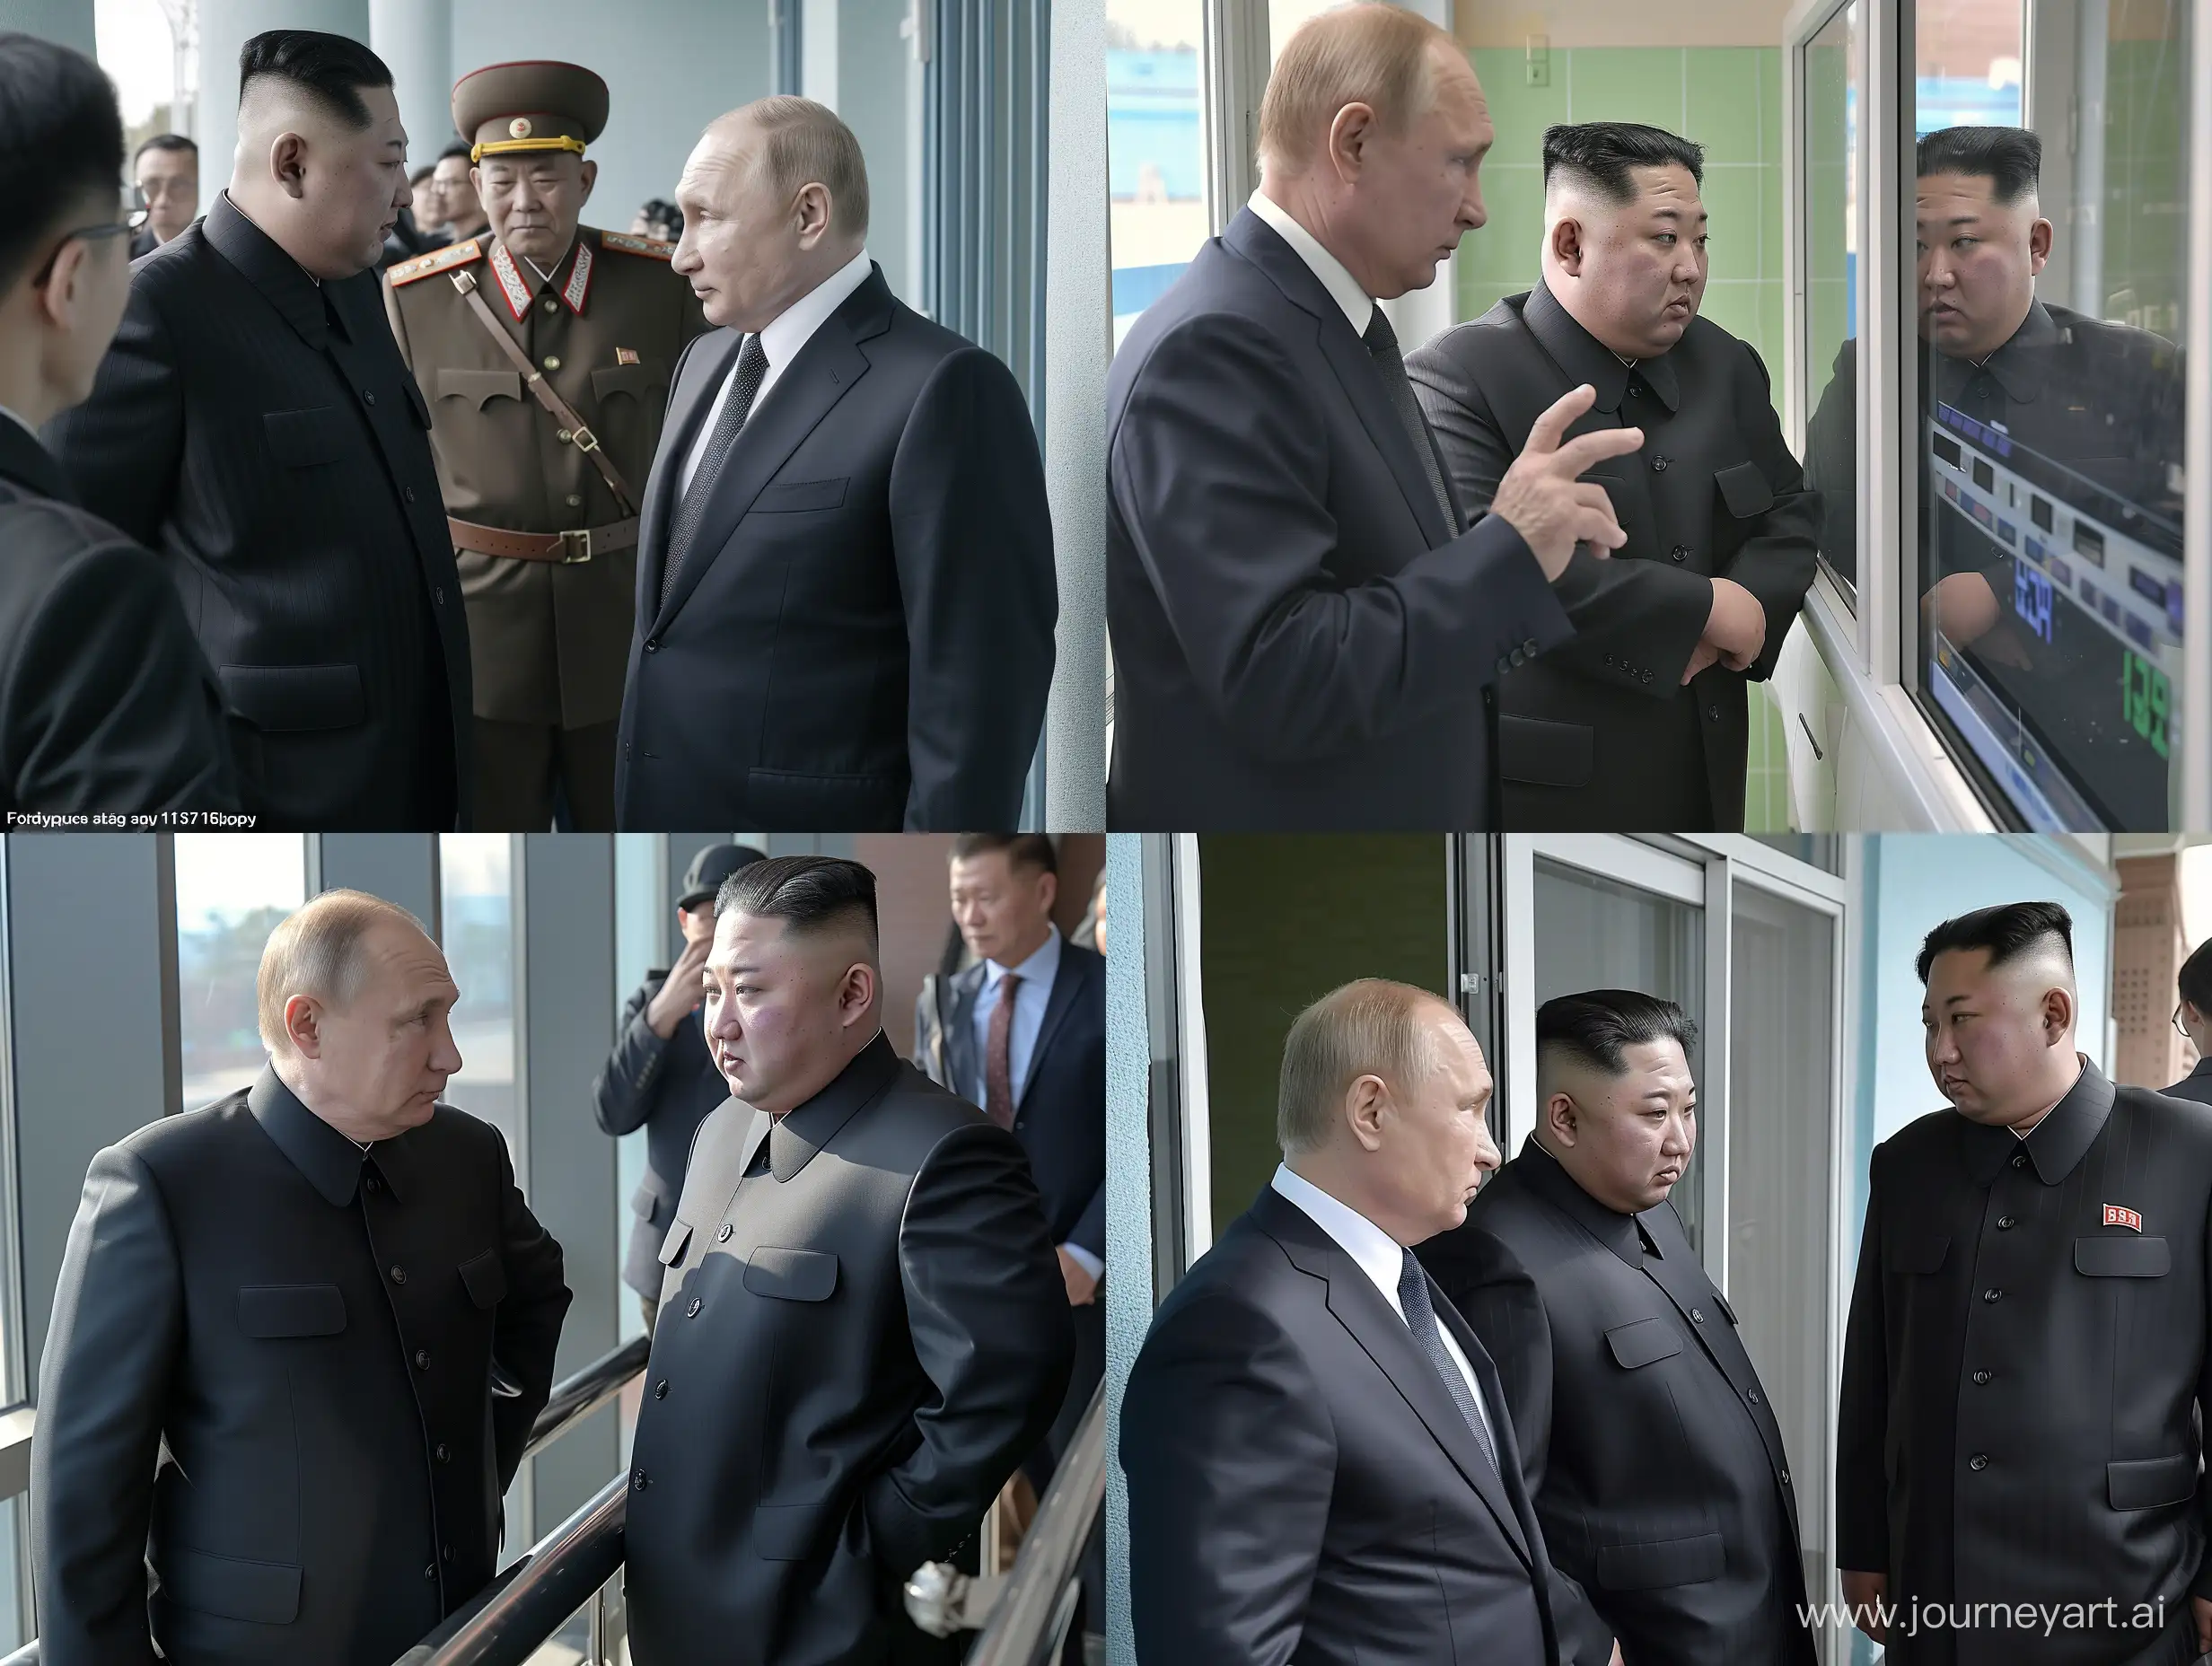 a raw photo capturing putin with kim jong  , daytime, natural lighting, indoors, there looking at weaopns,